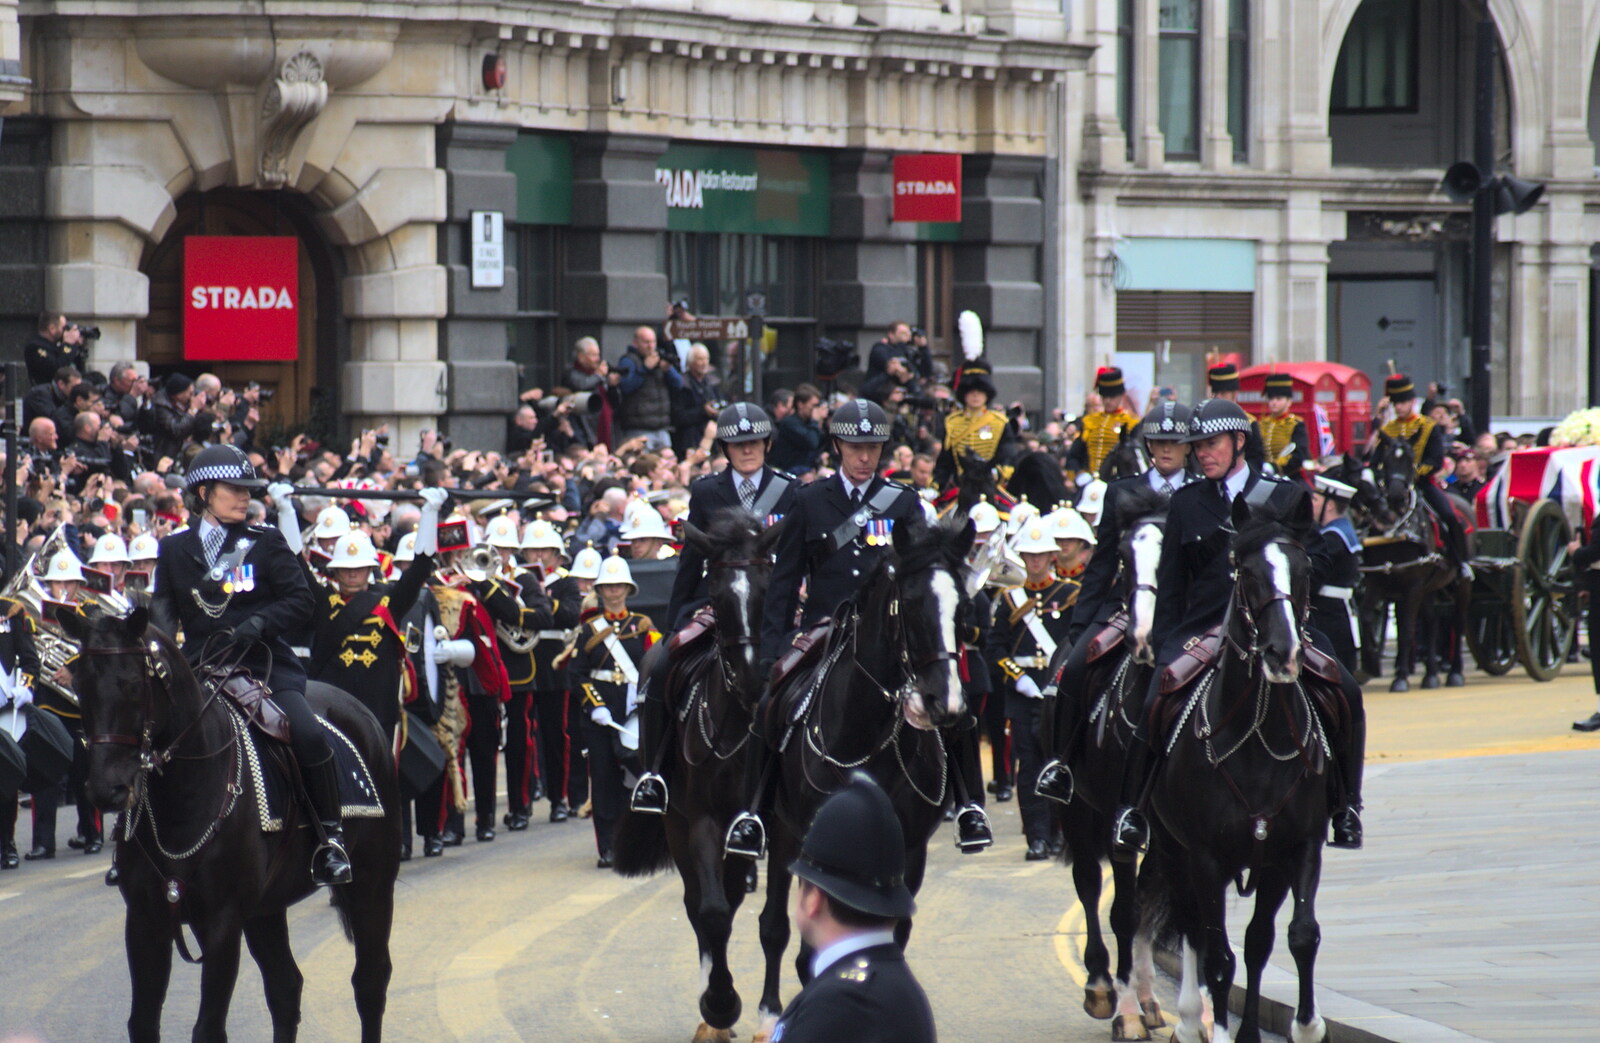 The flag-draped coffin stops by St. Paul's from Margaret Thatcher's Funeral, St. Paul's, London - 17th April 2013